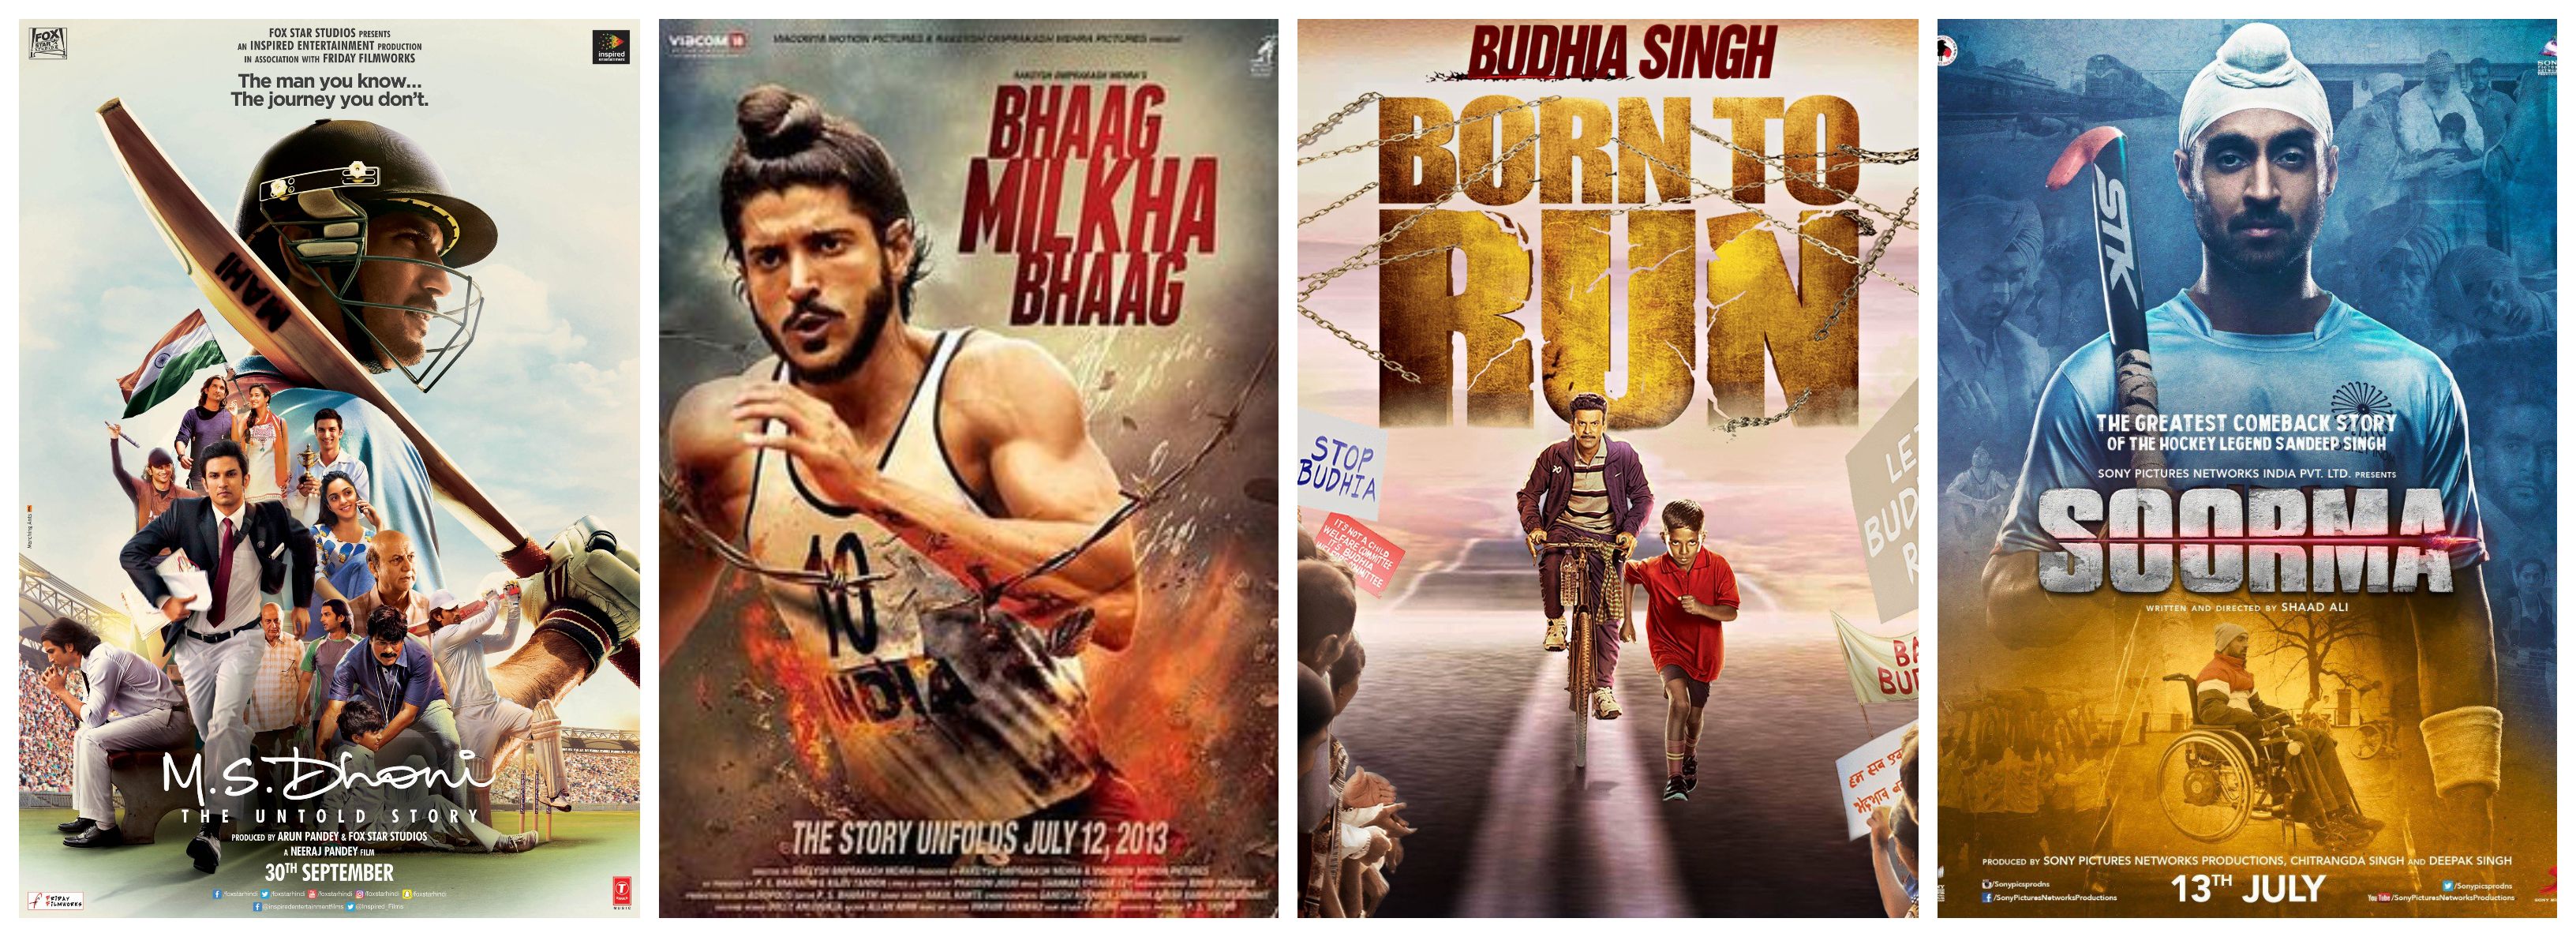 Bollywood movies based on sports